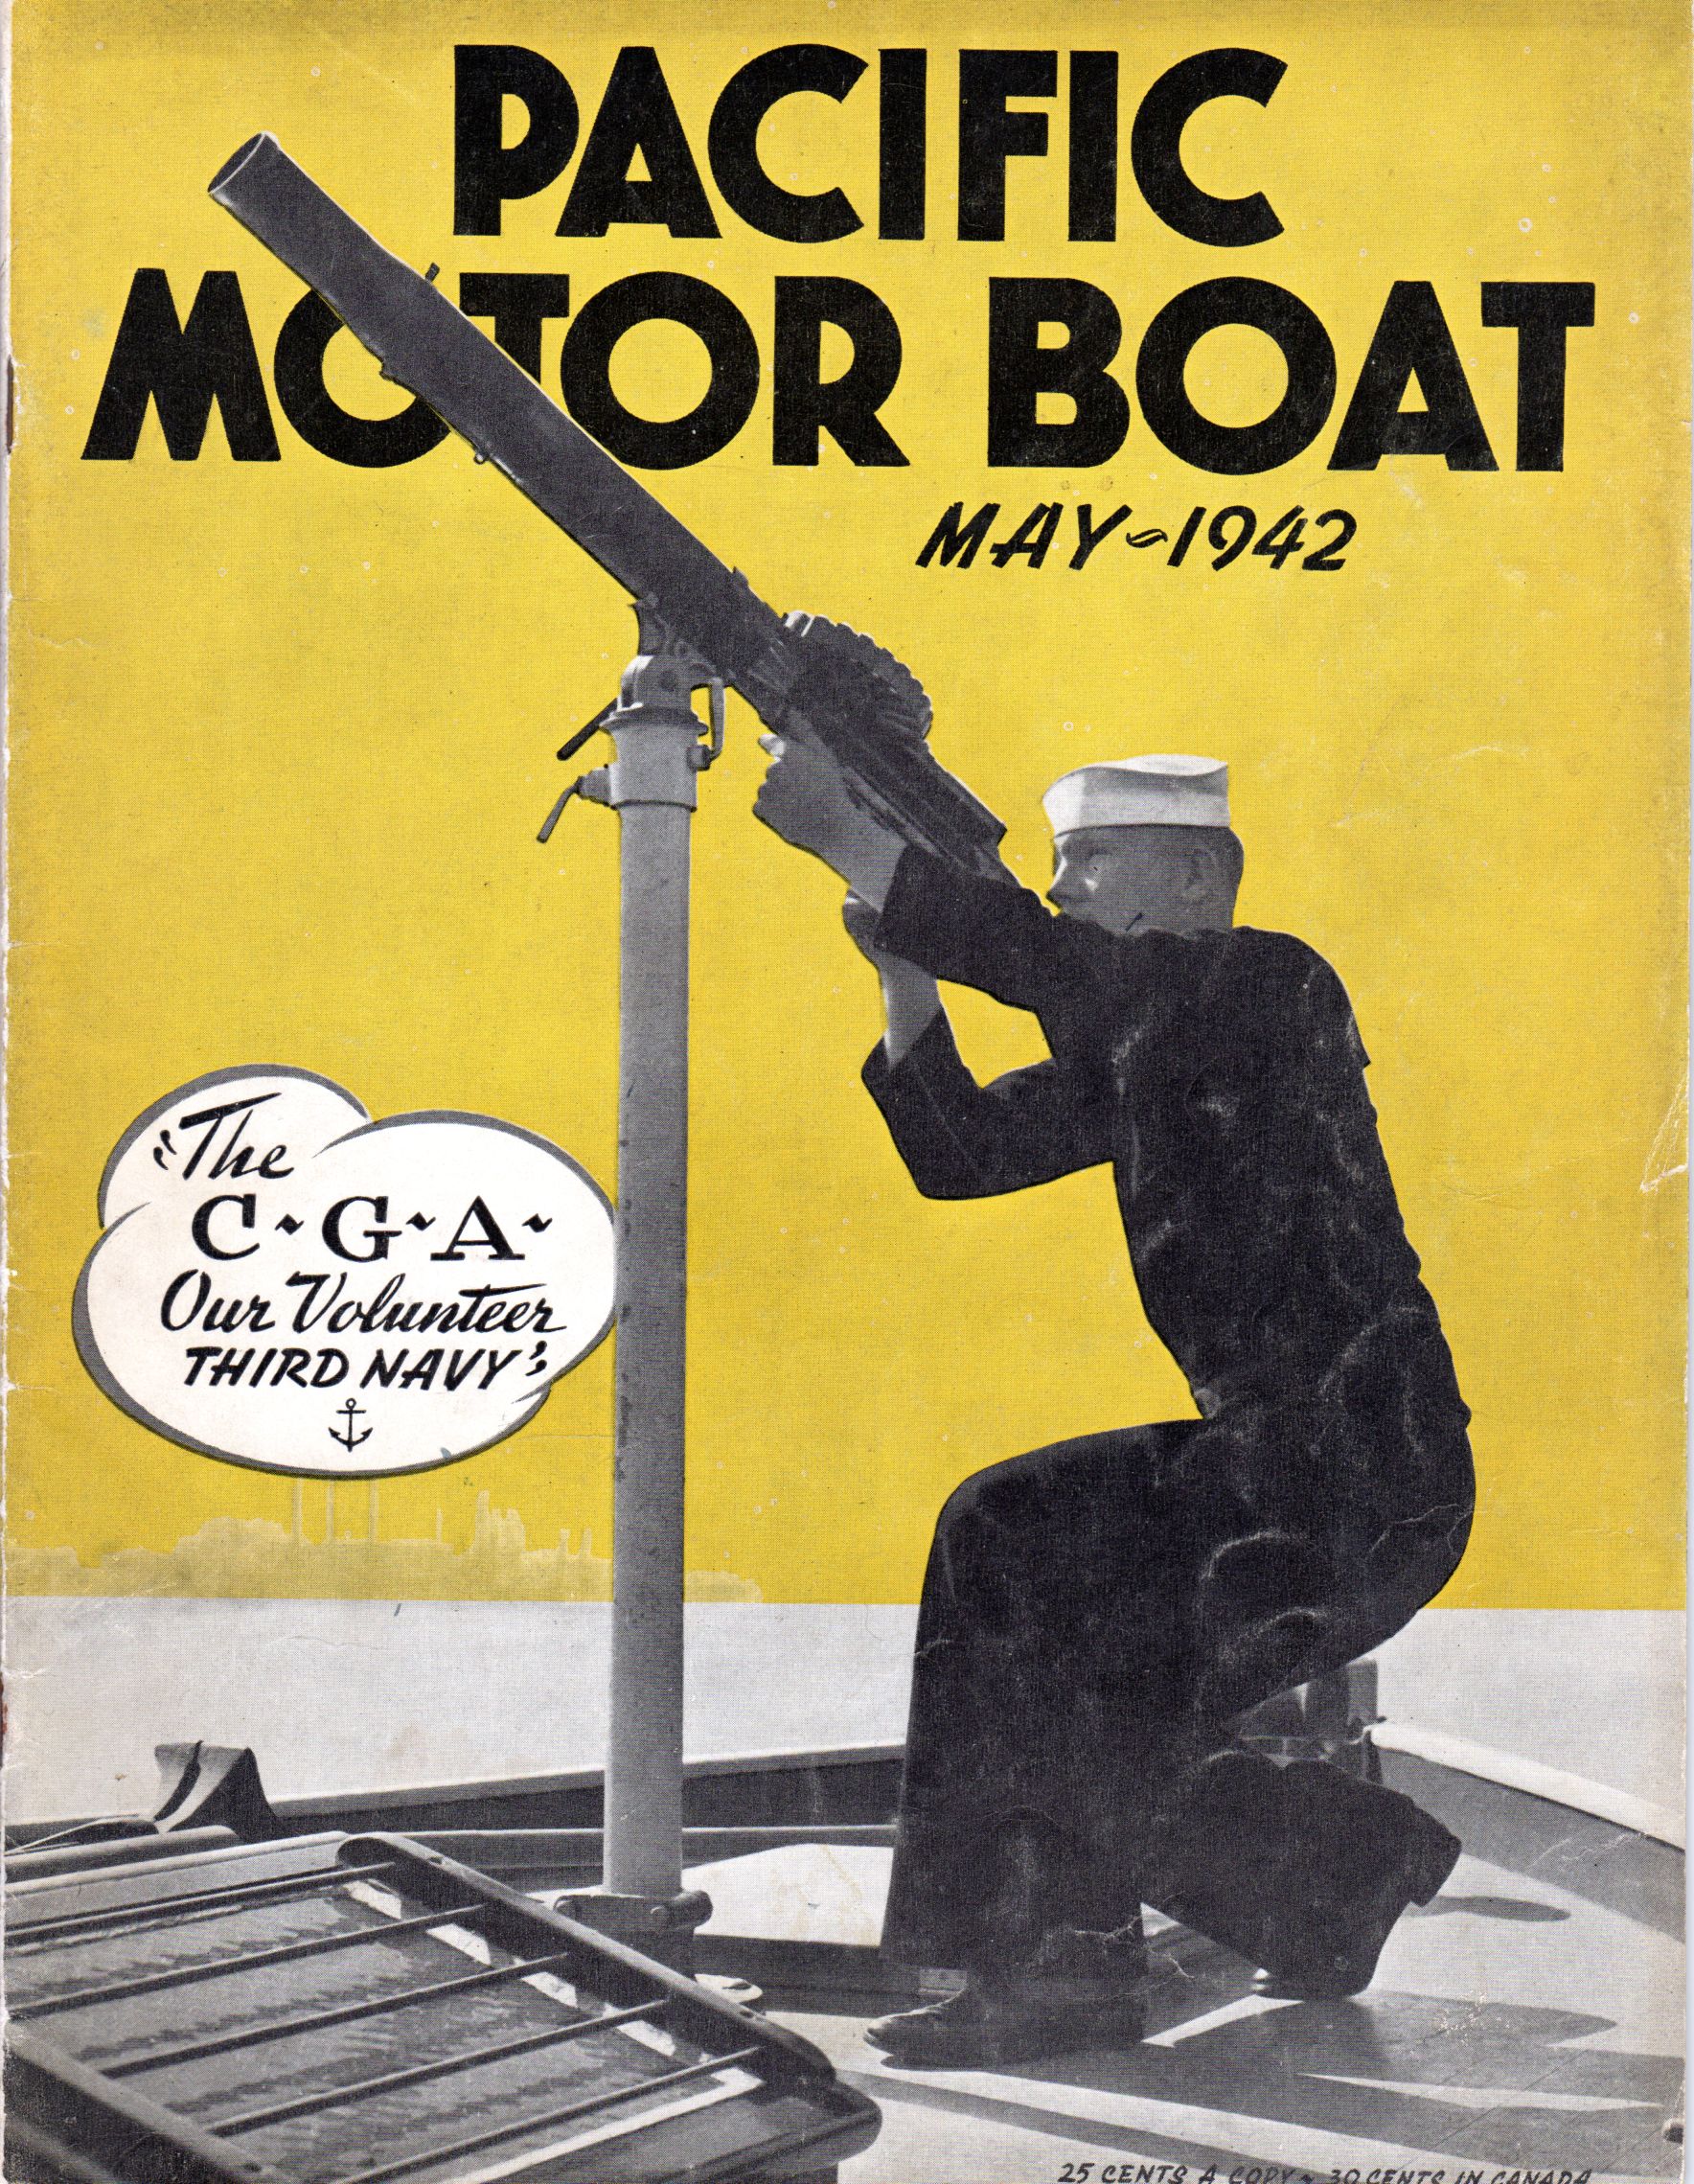 Pacific Motor Boat Magazine Wartime Cover